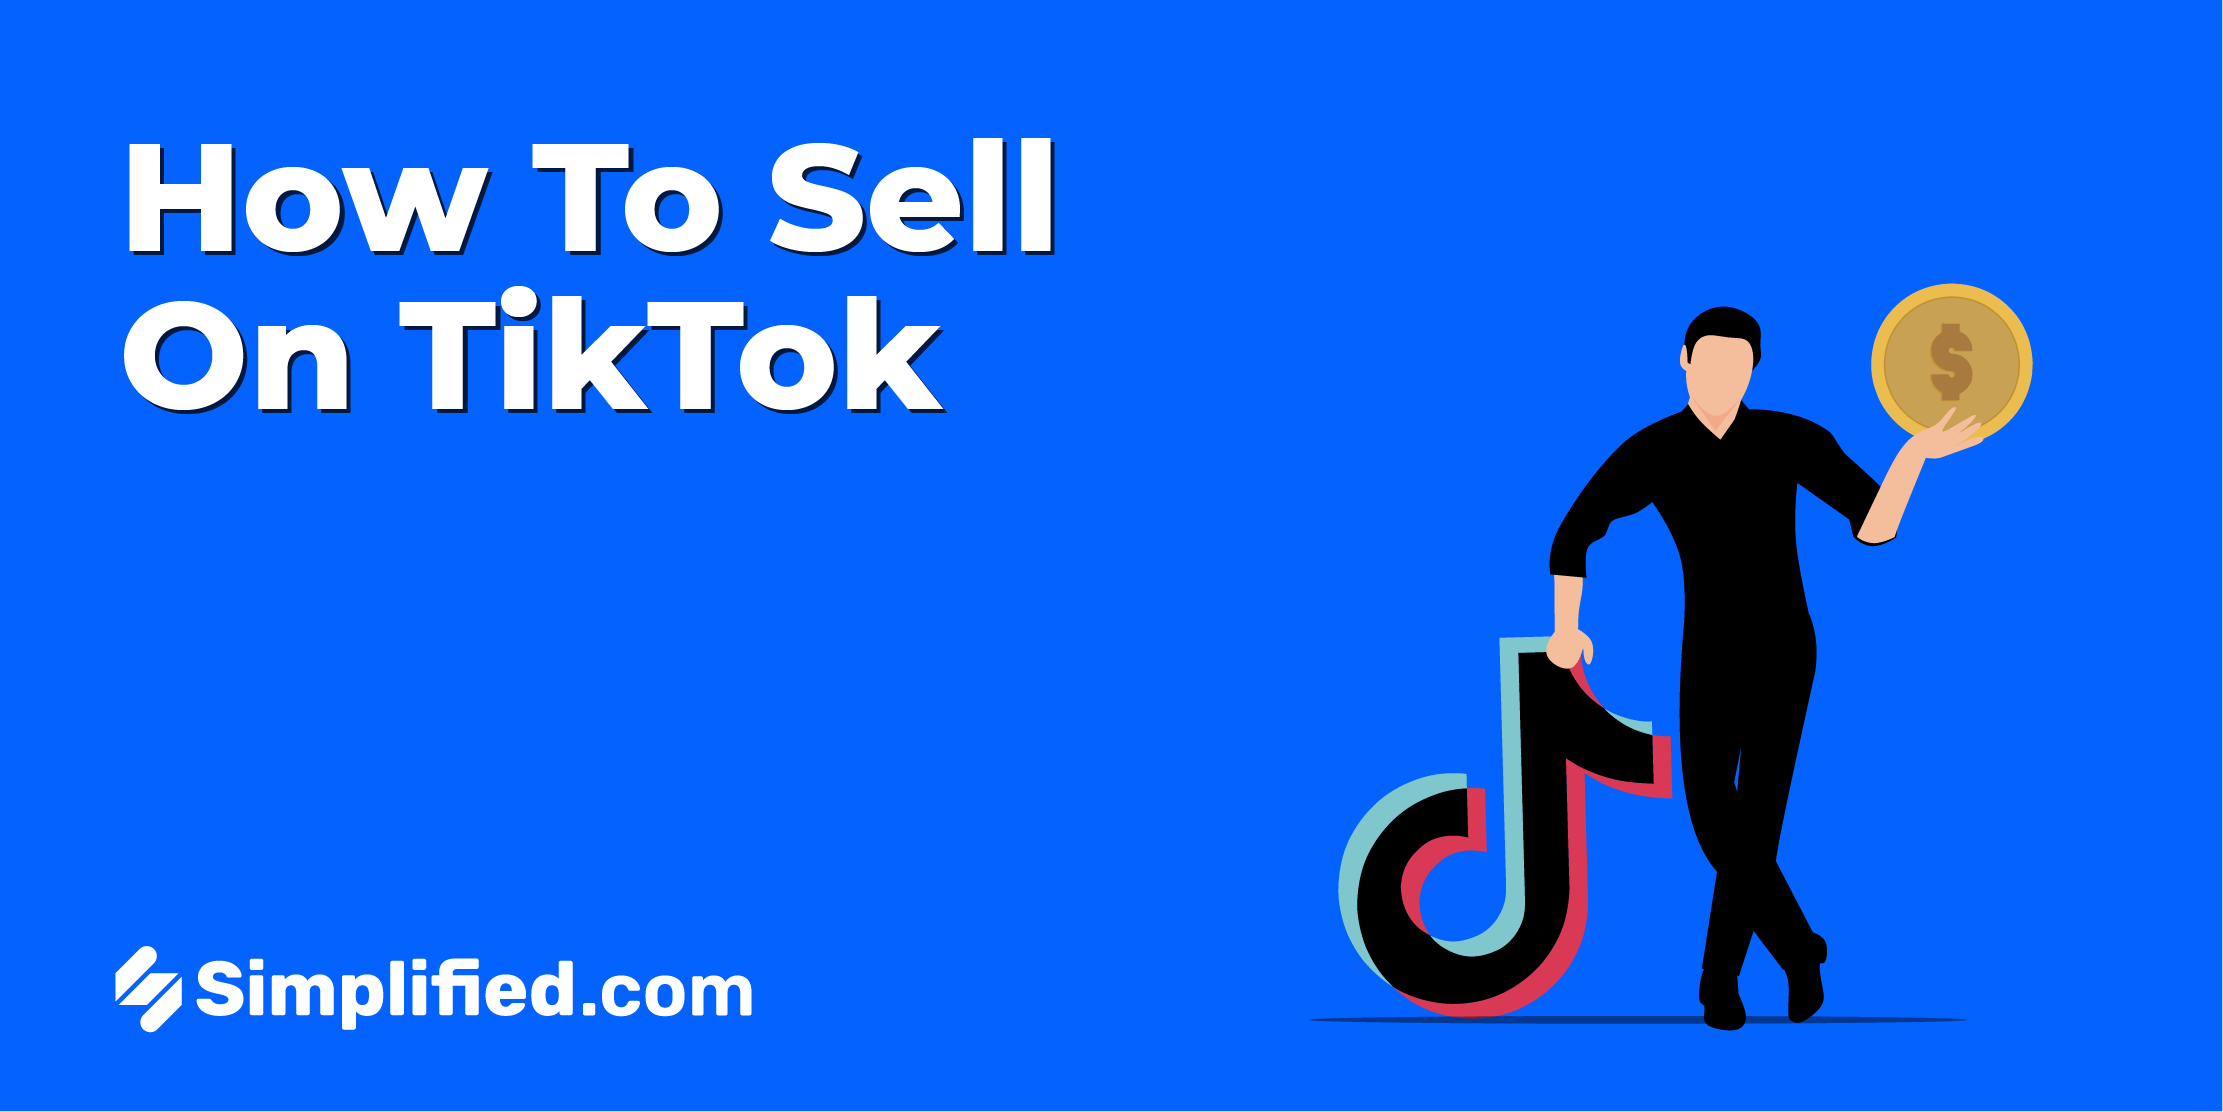 https://siteimages.simplified.com/blog/how-to-sell-on-tiktok-simplified.png?auto=compress&fm=png